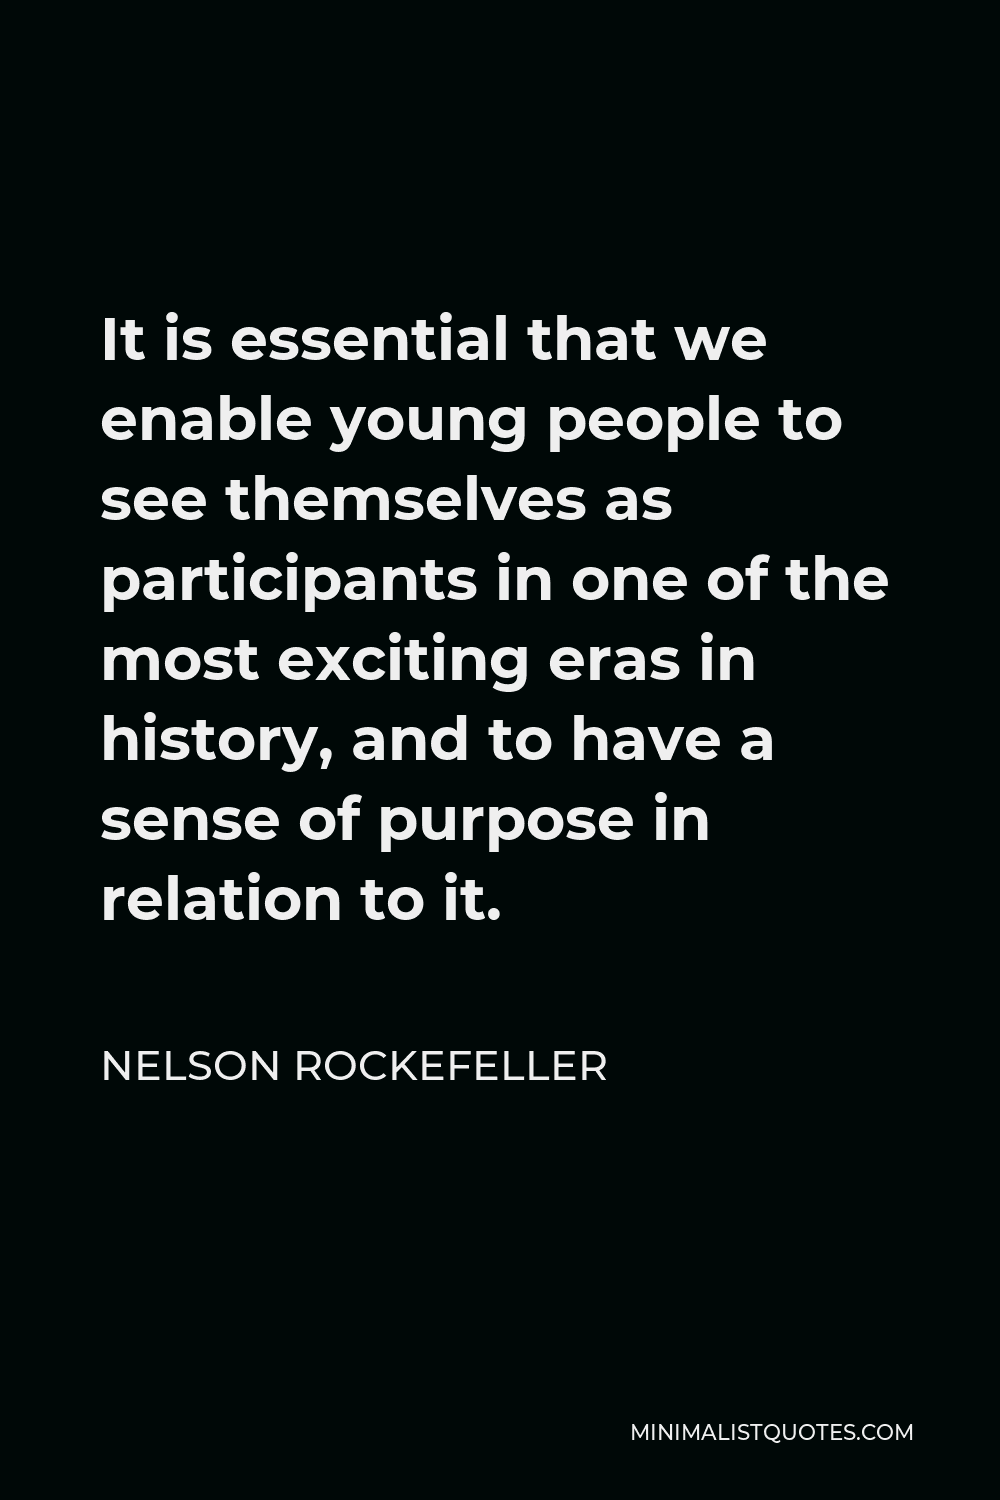 Nelson Rockefeller Quote - It is essential that we enable young people to see themselves as participants in one of the most exciting eras in history, and to have a sense of purpose in relation to it.